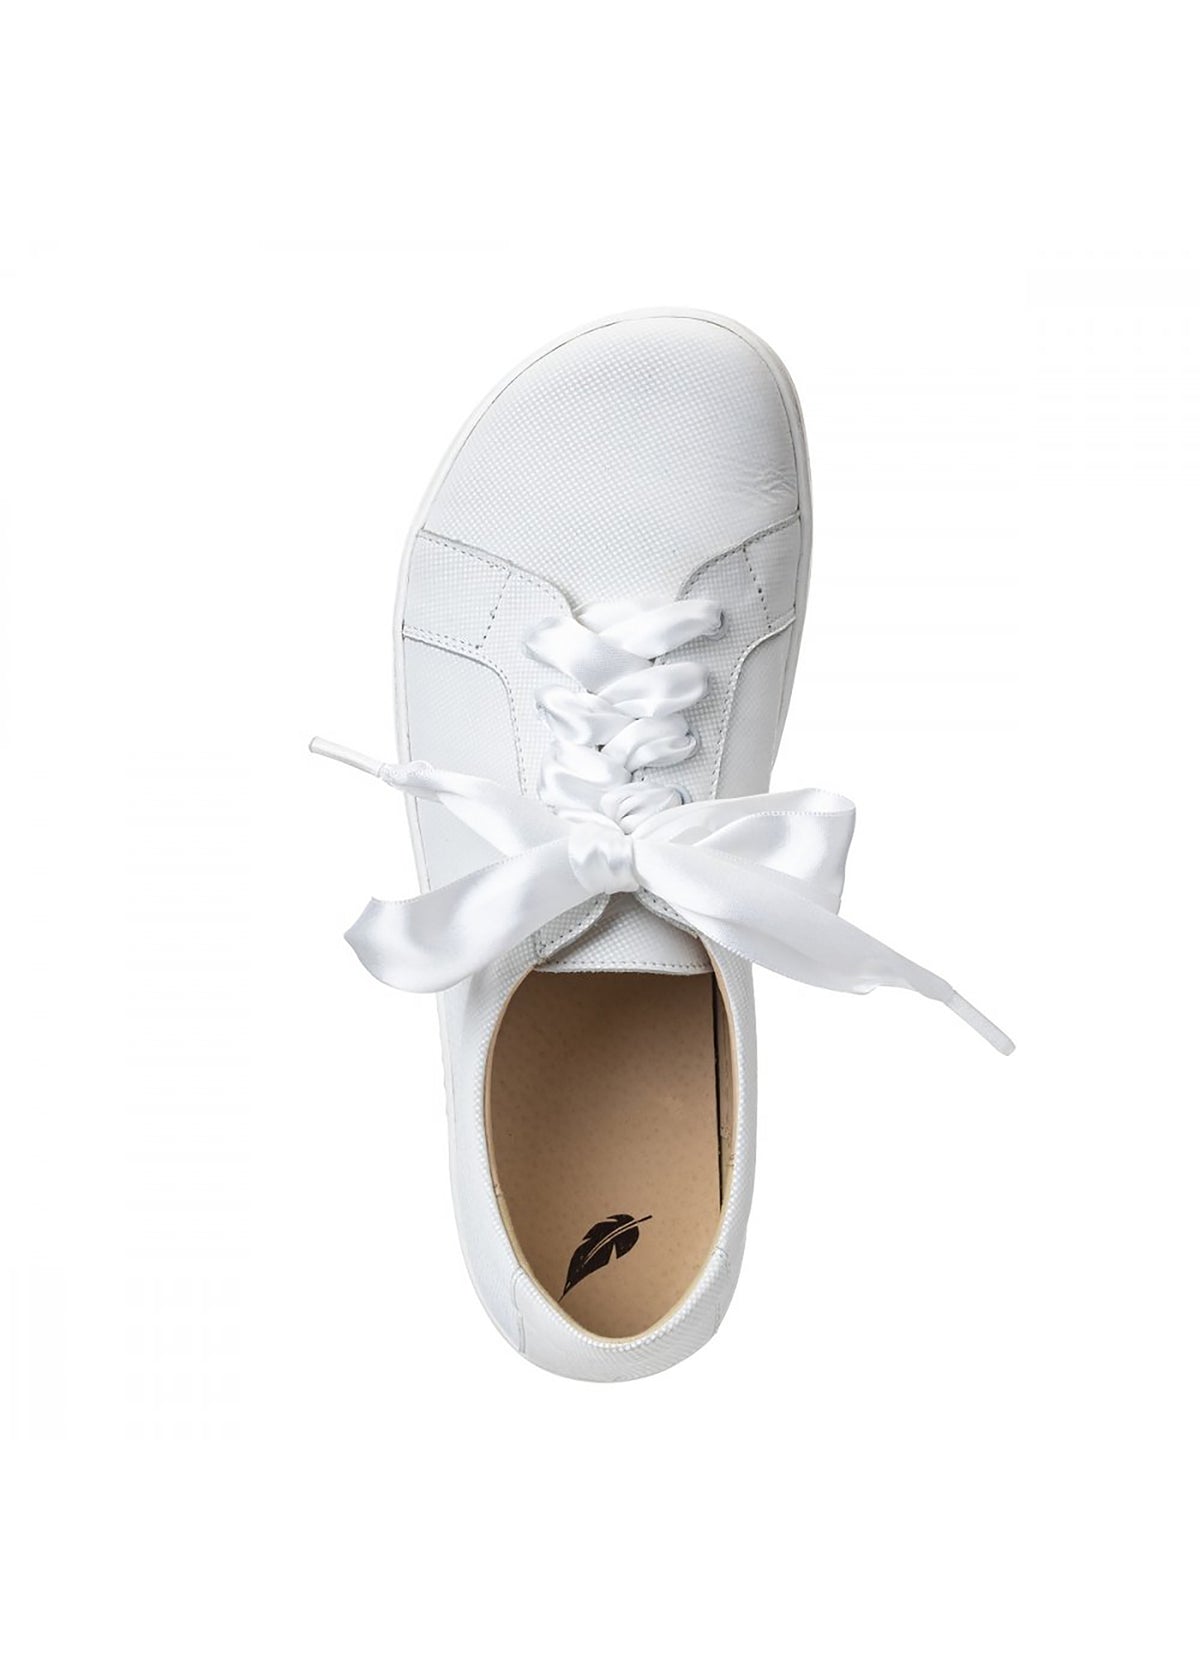 Barefoot shoes, Low-top sneakers - Celebrate Day, white